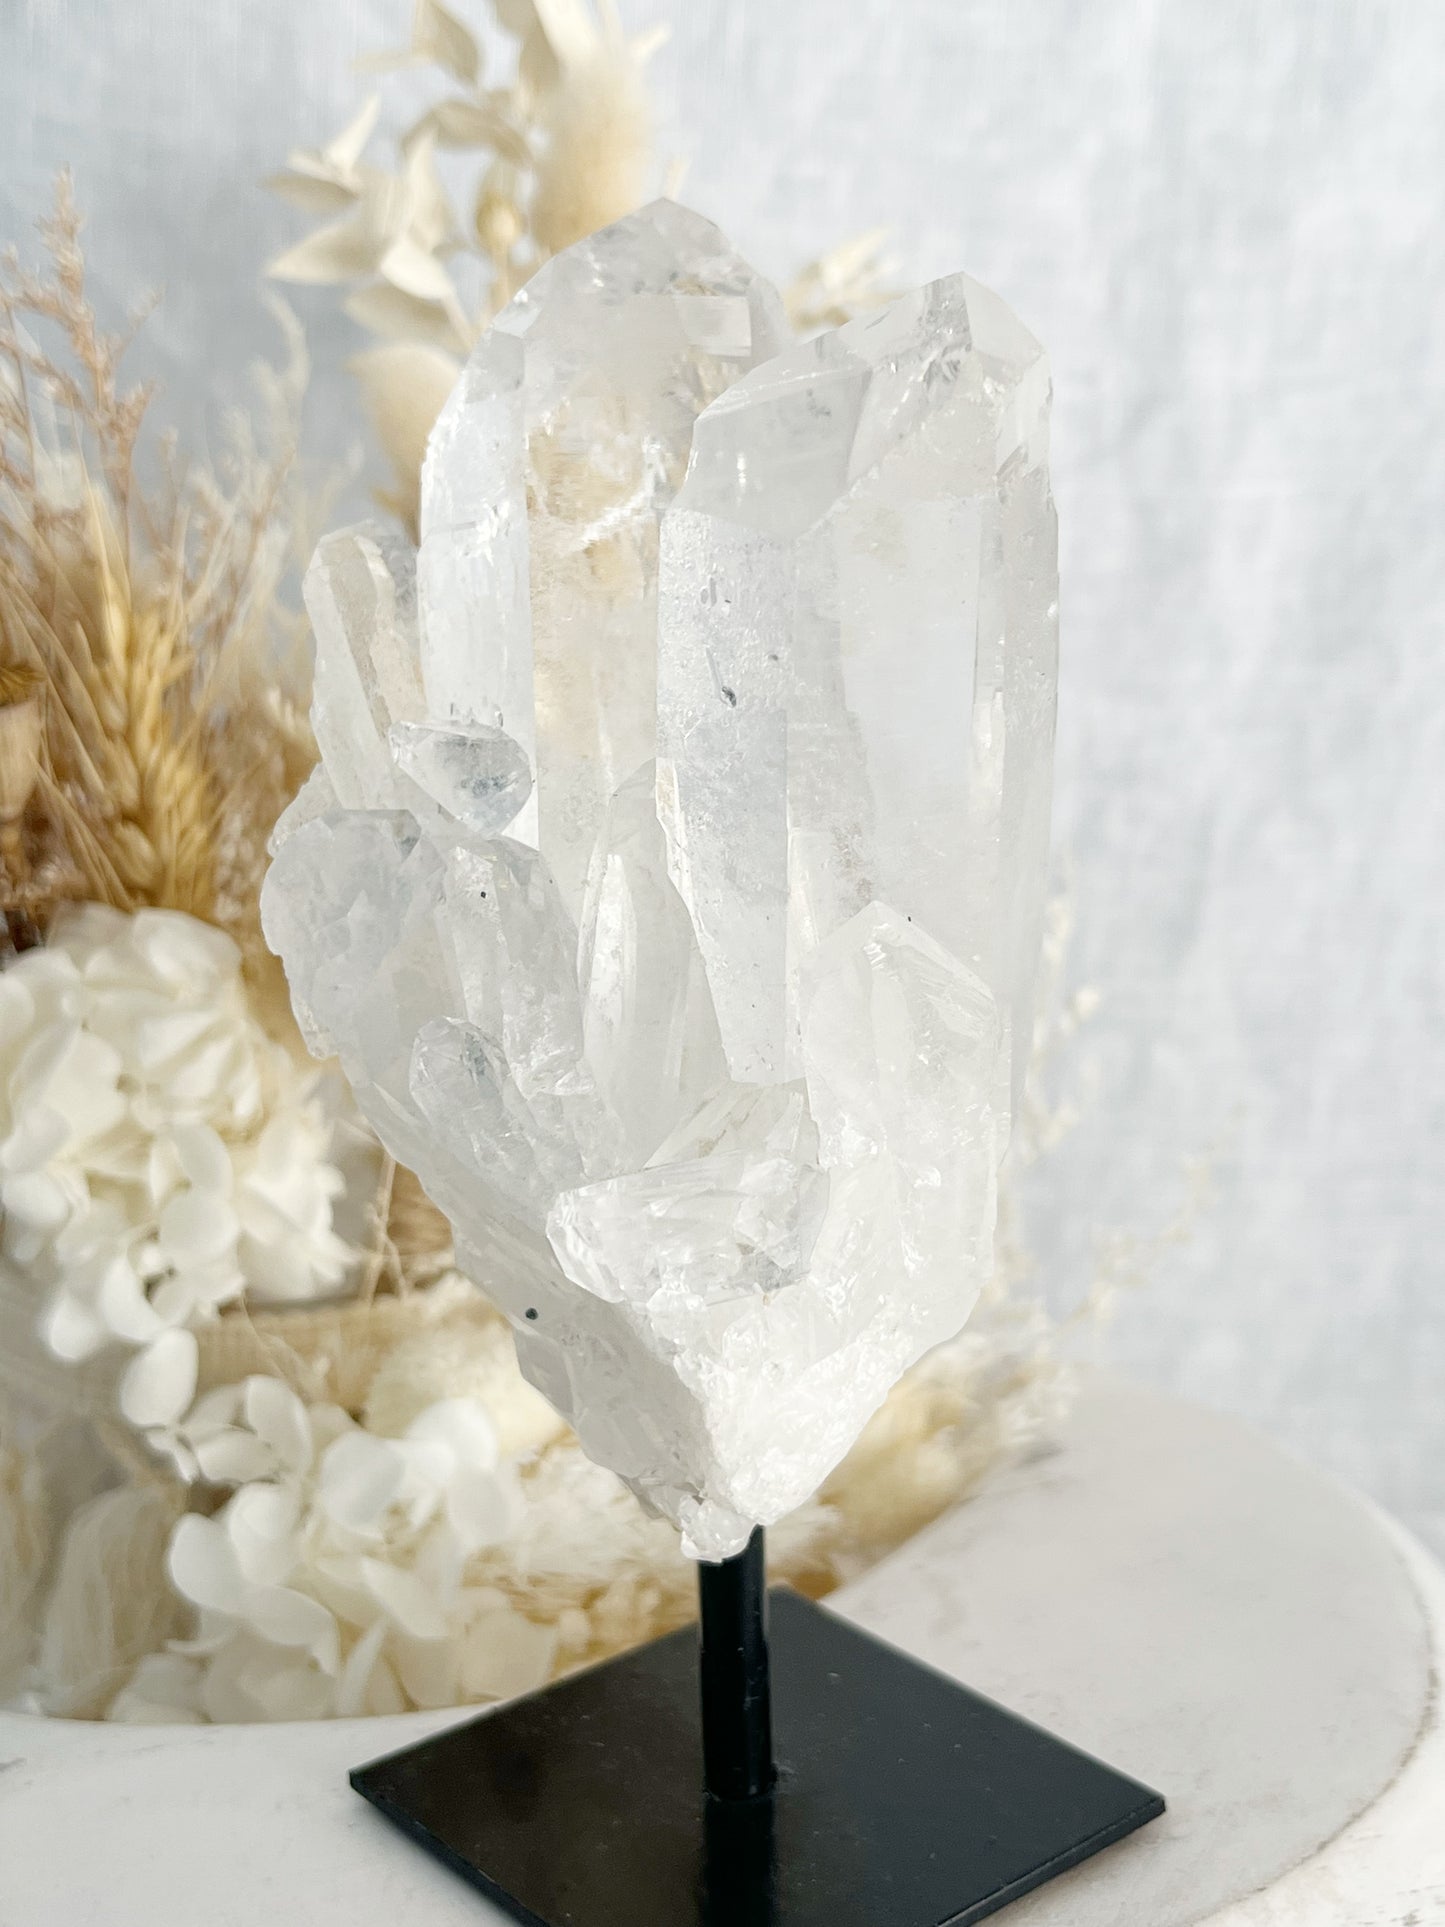 CLEAR QUARTZ CLUSTER ON STAND, STONED AND SAGED AUSTRALIA